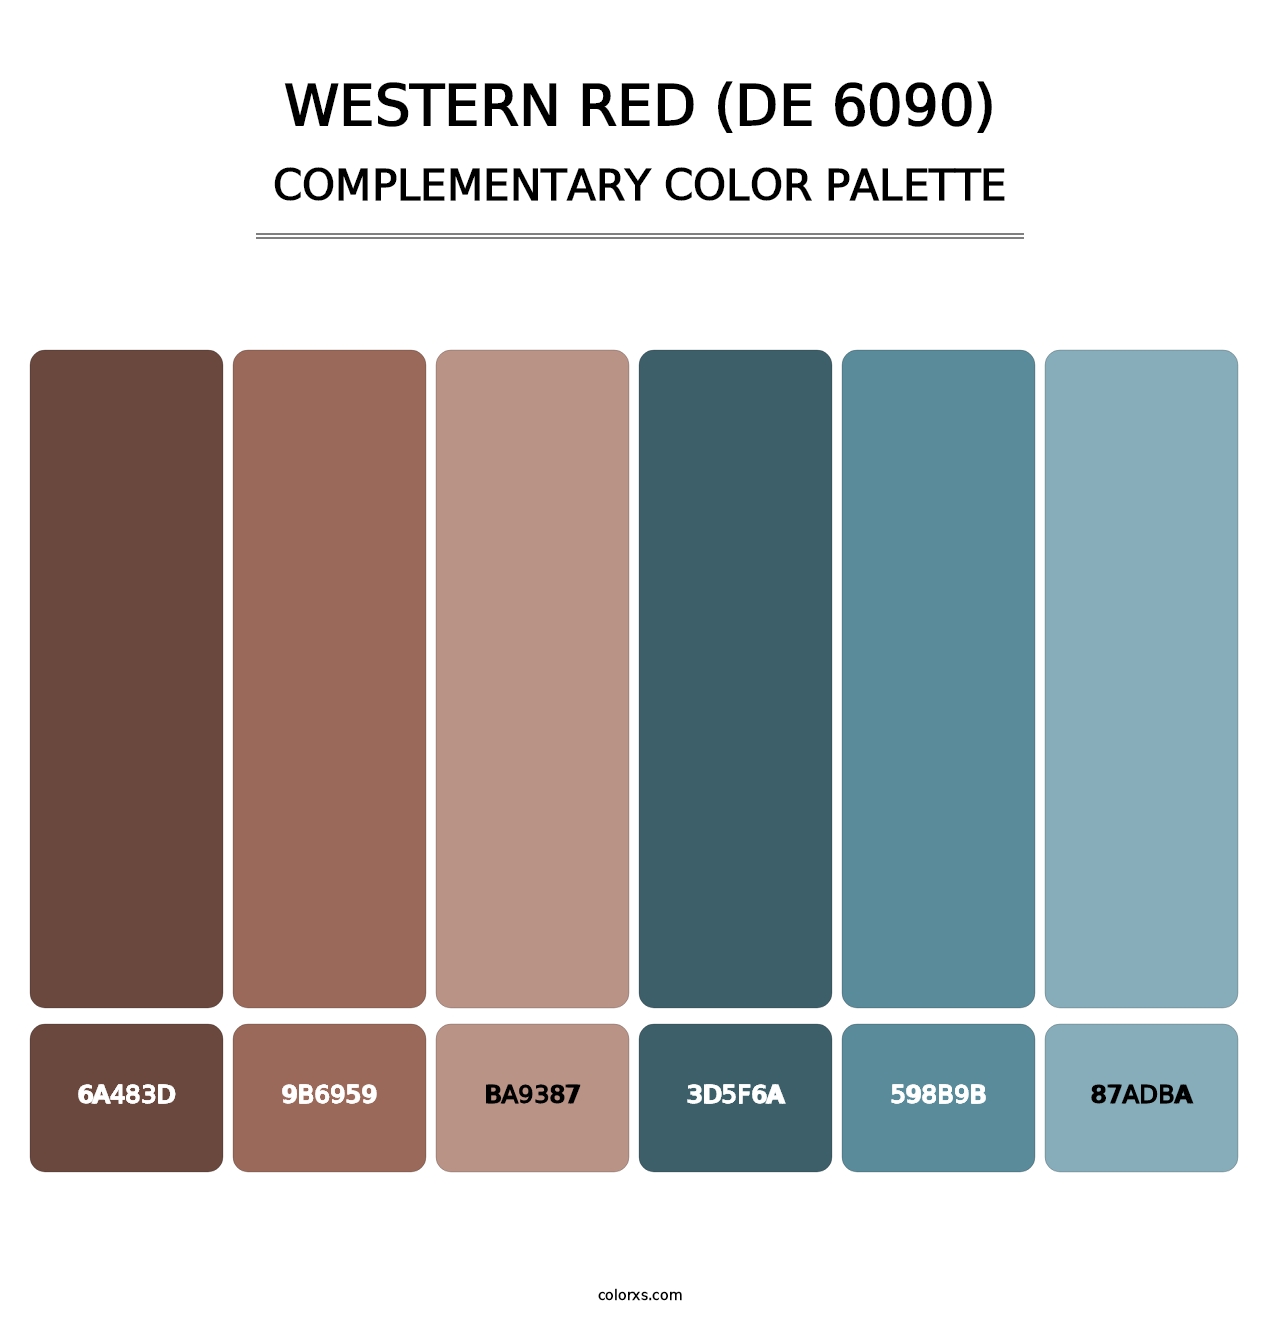 Western Red (DE 6090) - Complementary Color Palette